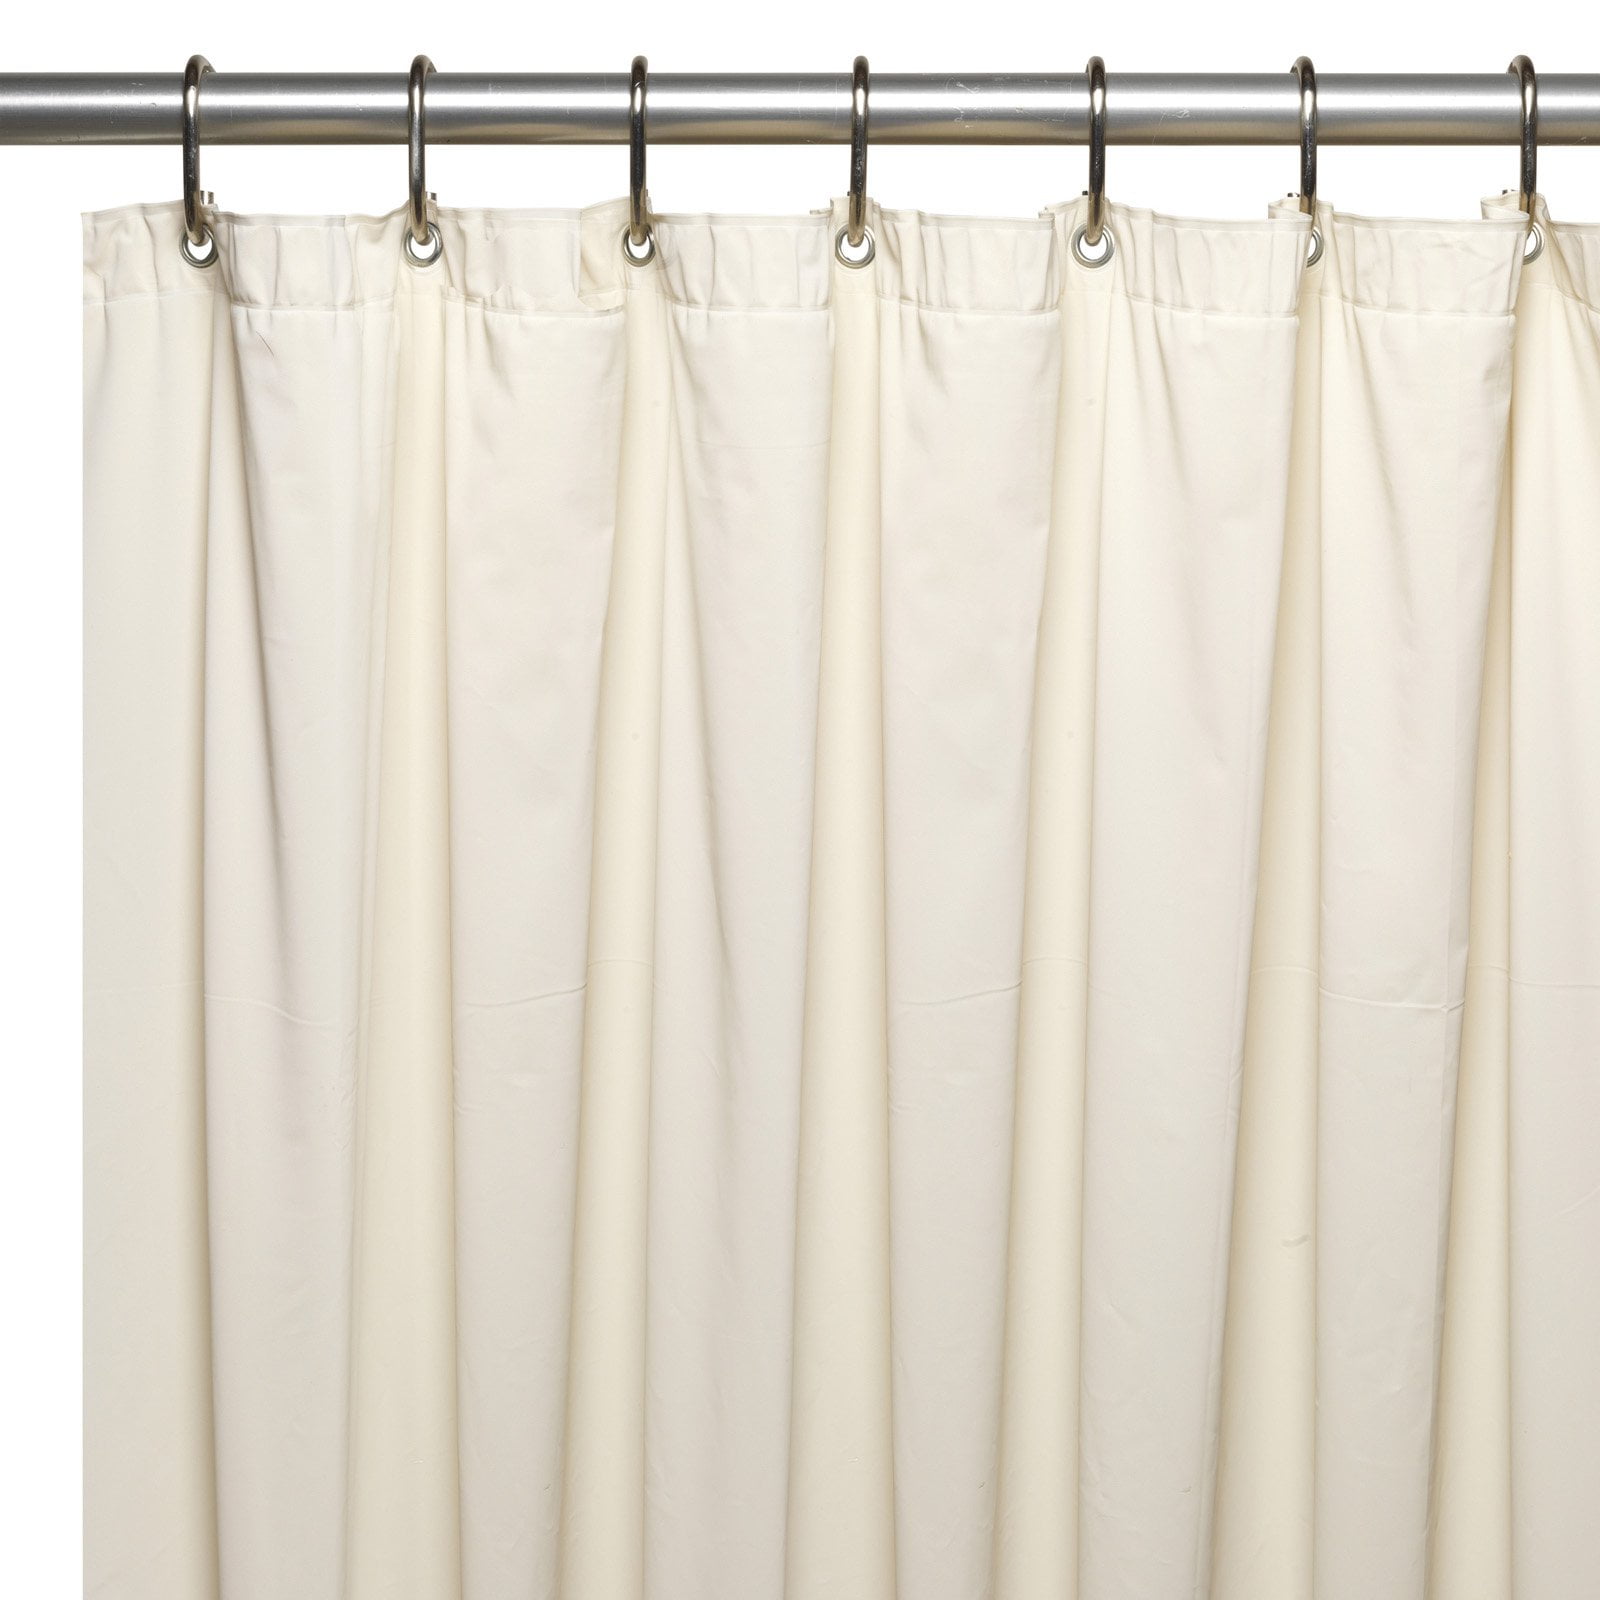 Smoke Vinyl Shower Curtain Liner  Extra Long Size 72 x 84 Mildew Mold Resistant 